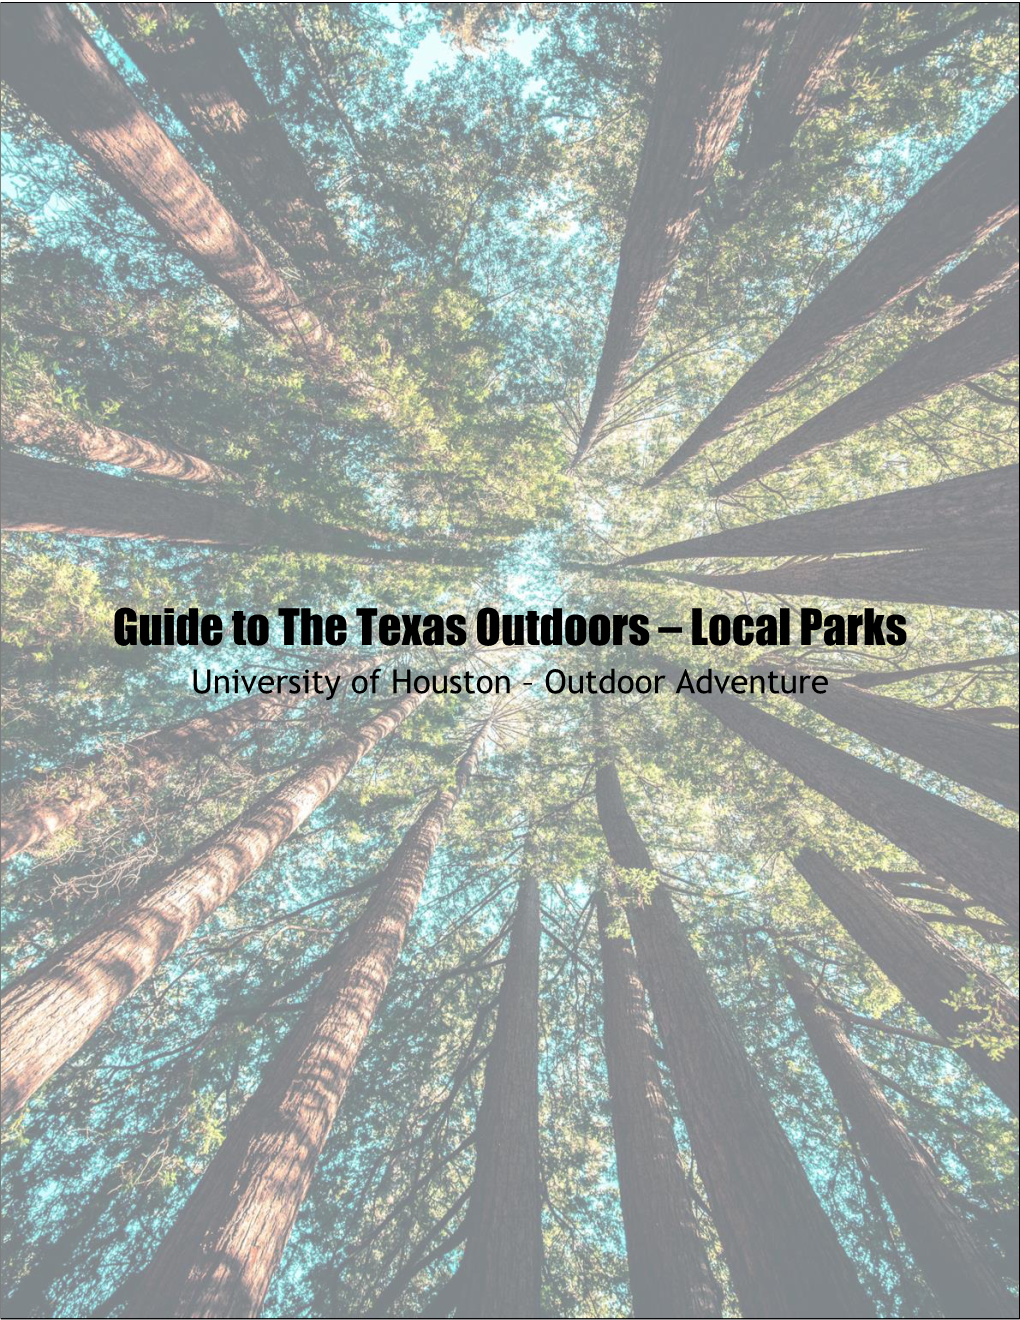 Guide to the Texas Outdoors – Local Parks University of Houston – Outdoor Adventure